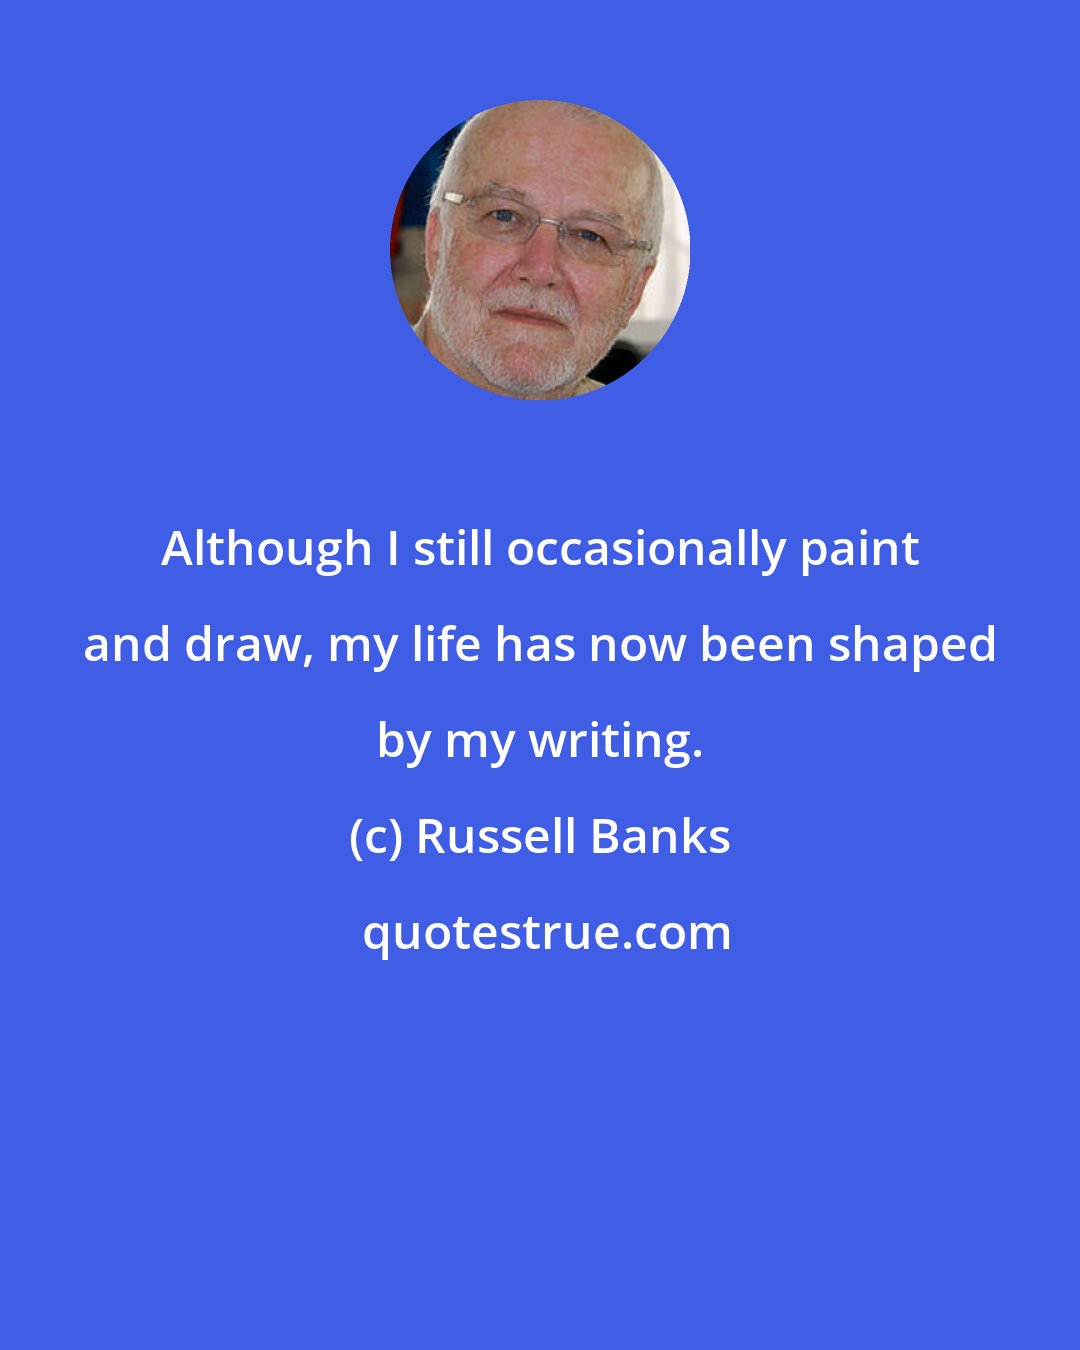 Russell Banks: Although I still occasionally paint and draw, my life has now been shaped by my writing.